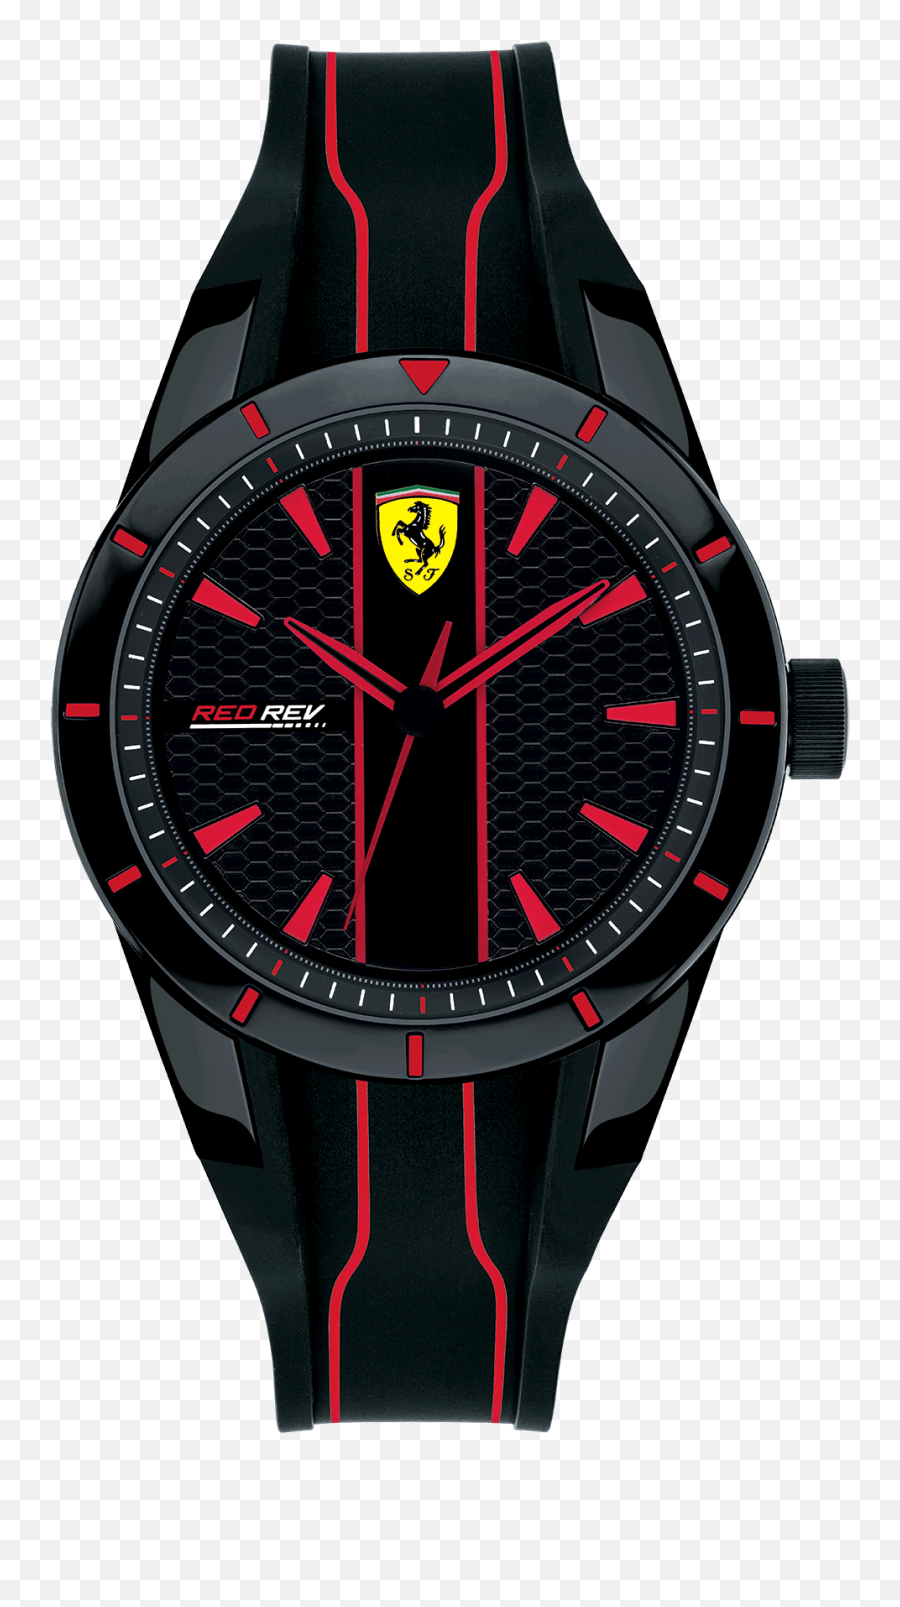 Red Watch Ferrari Full Size Png Download Seekpng - Ferrari Watch 0830481,Ferrari Png